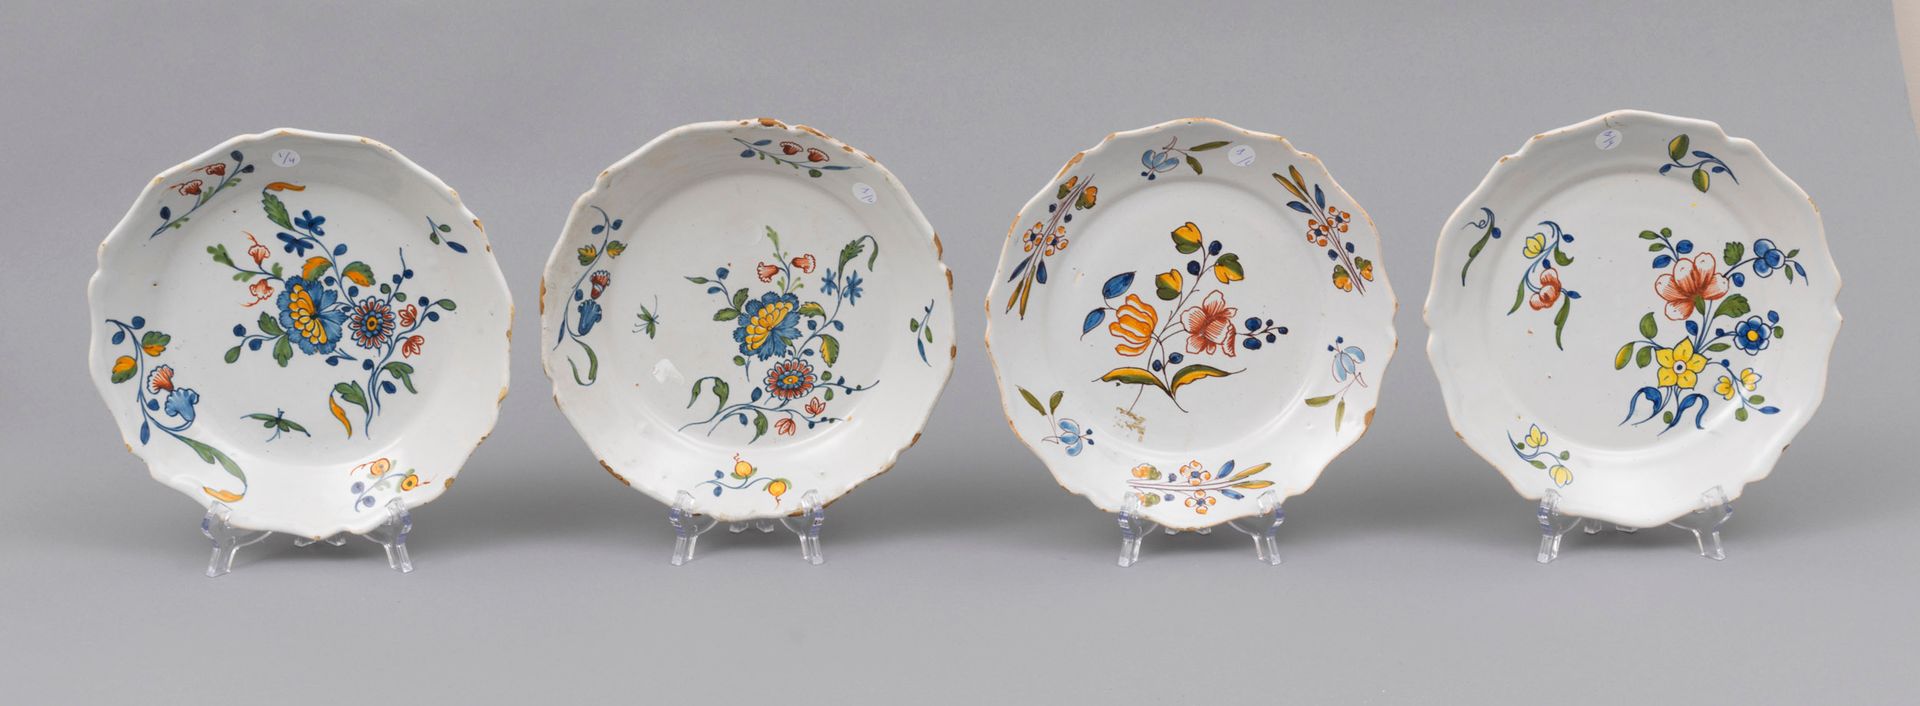 Faience Nevers 
Nevers

Four earthenware plates with contoured edges has polychr&hellip;